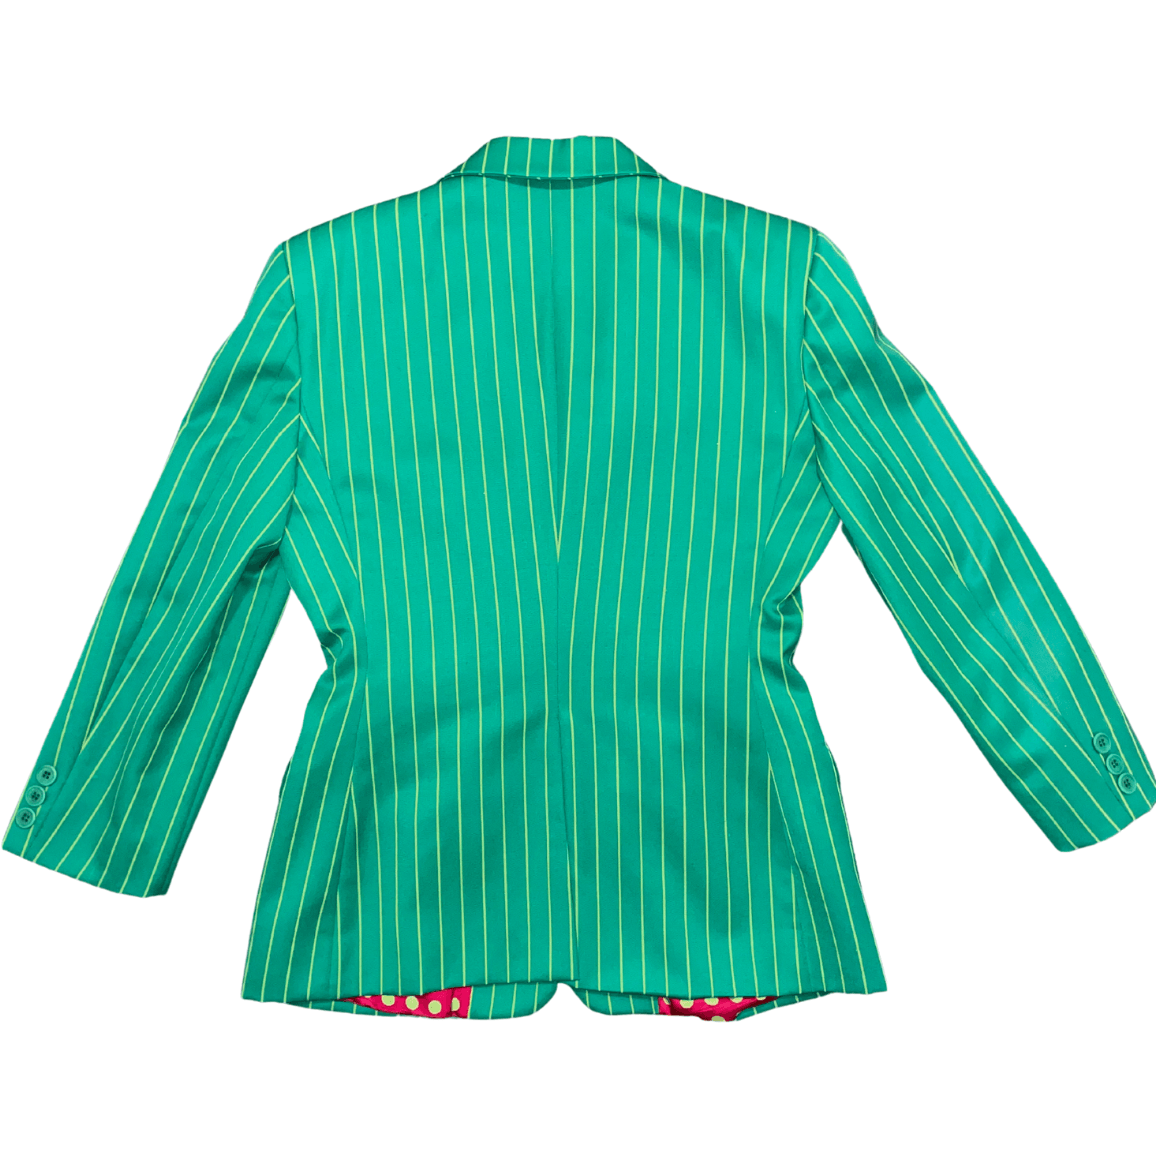 Moschino Vintage Green Stripe Blazer - greens are good for you